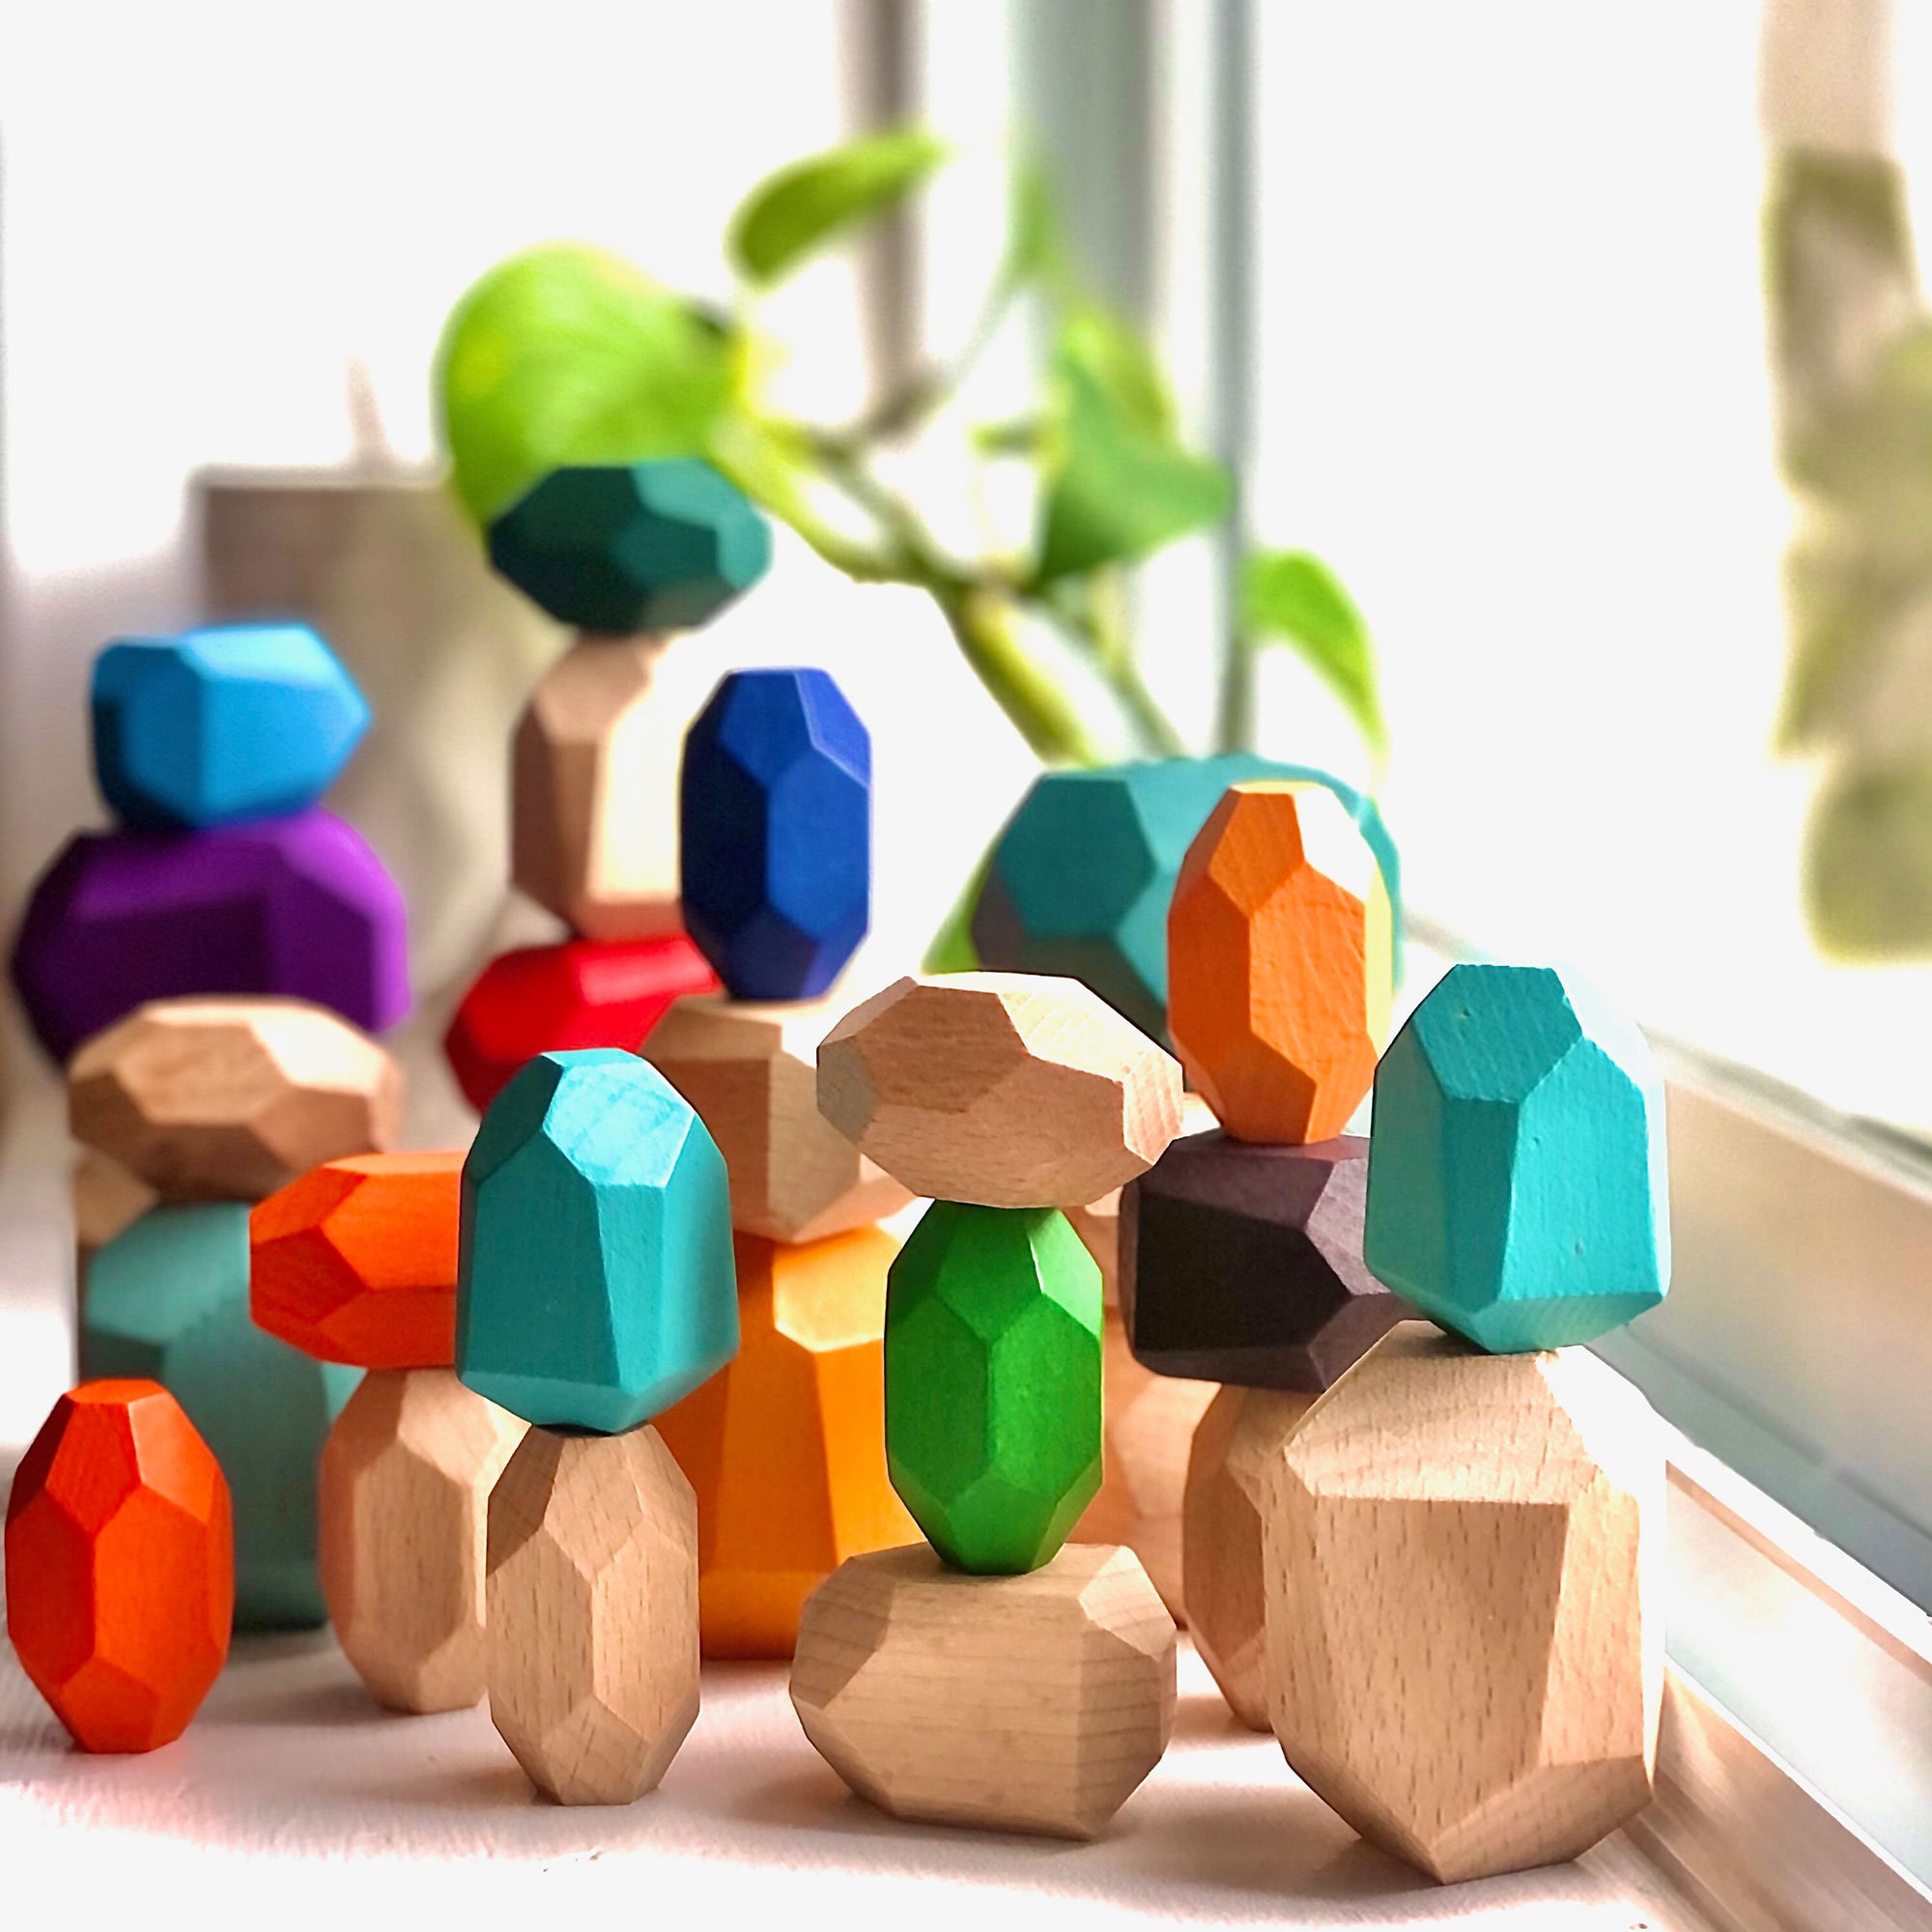 16 Pcs Baby Toy Wooden Toys Colored Stacking Balancing Stone Building Blocks uk 